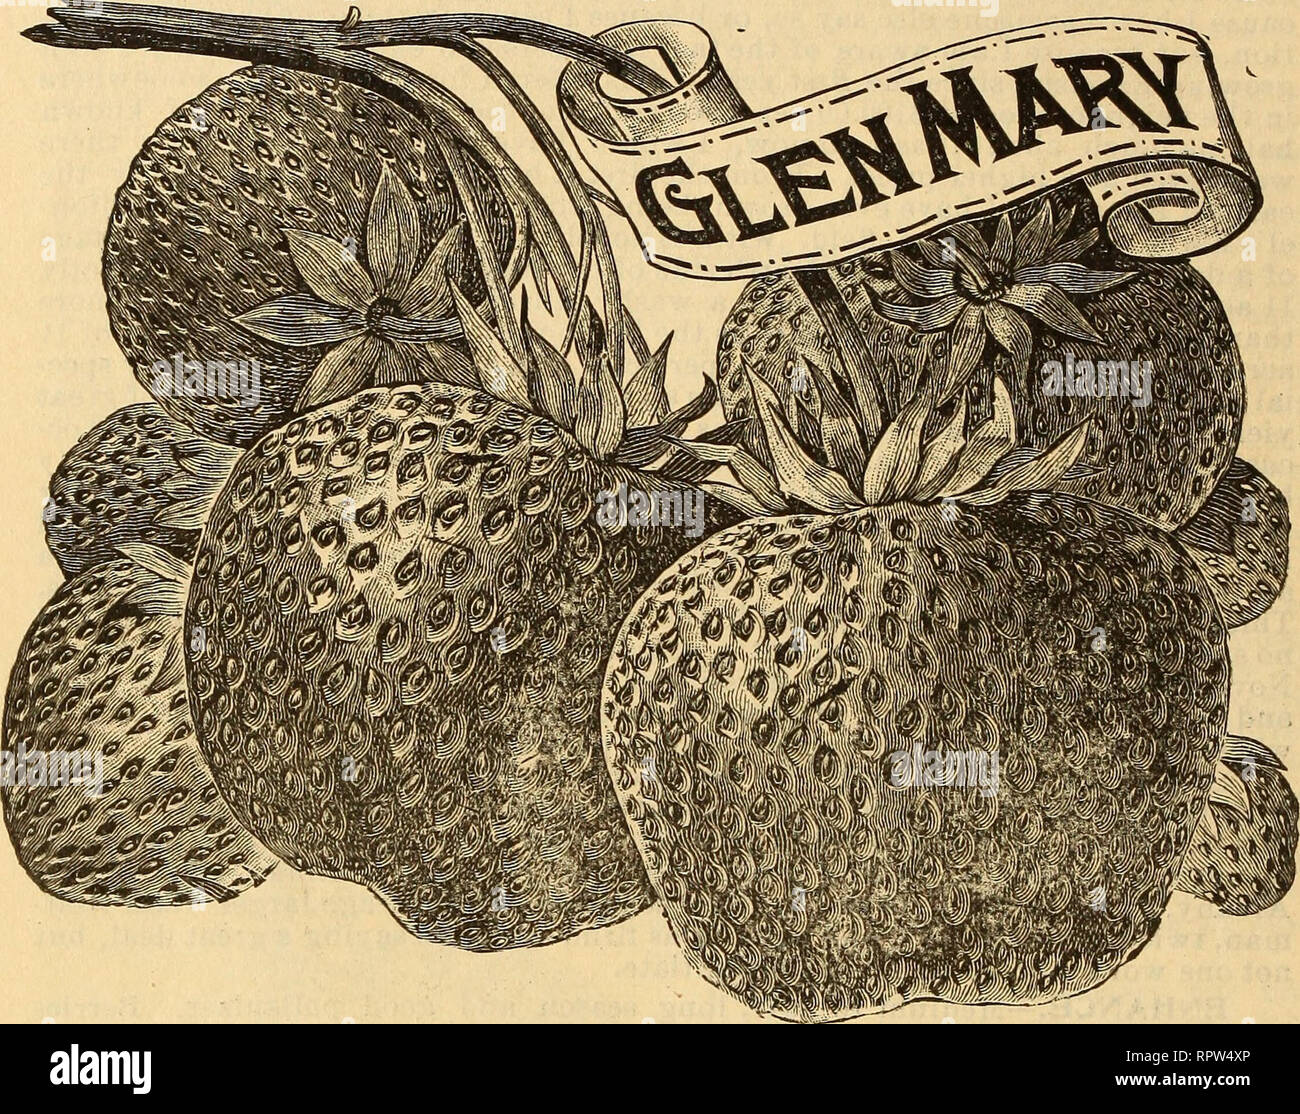 . Allen's strawberry catalogue : spring 1903. Nurseries (Horticulture) Maryland Salisbury Catalogs; Nursery stock Maryland Salisbury Catalogs; Strawberries Maryland Salisbury Catalogs. 14 ALLEN'S STRAWBERRY PLANT CATALOGUE. GANDY.—Too well known to need extended description. The standard late berry everywhere. Large, firm, uniform and attractive, will not do its best at fruiting time on light sandy soils. Black swamp land, well drained, or medium stiff land seems to suit it best. My stock of this popular variety is very fine, and in sufficient quantity to fill all orders. GLEN MARY.—This varie Stock Photo